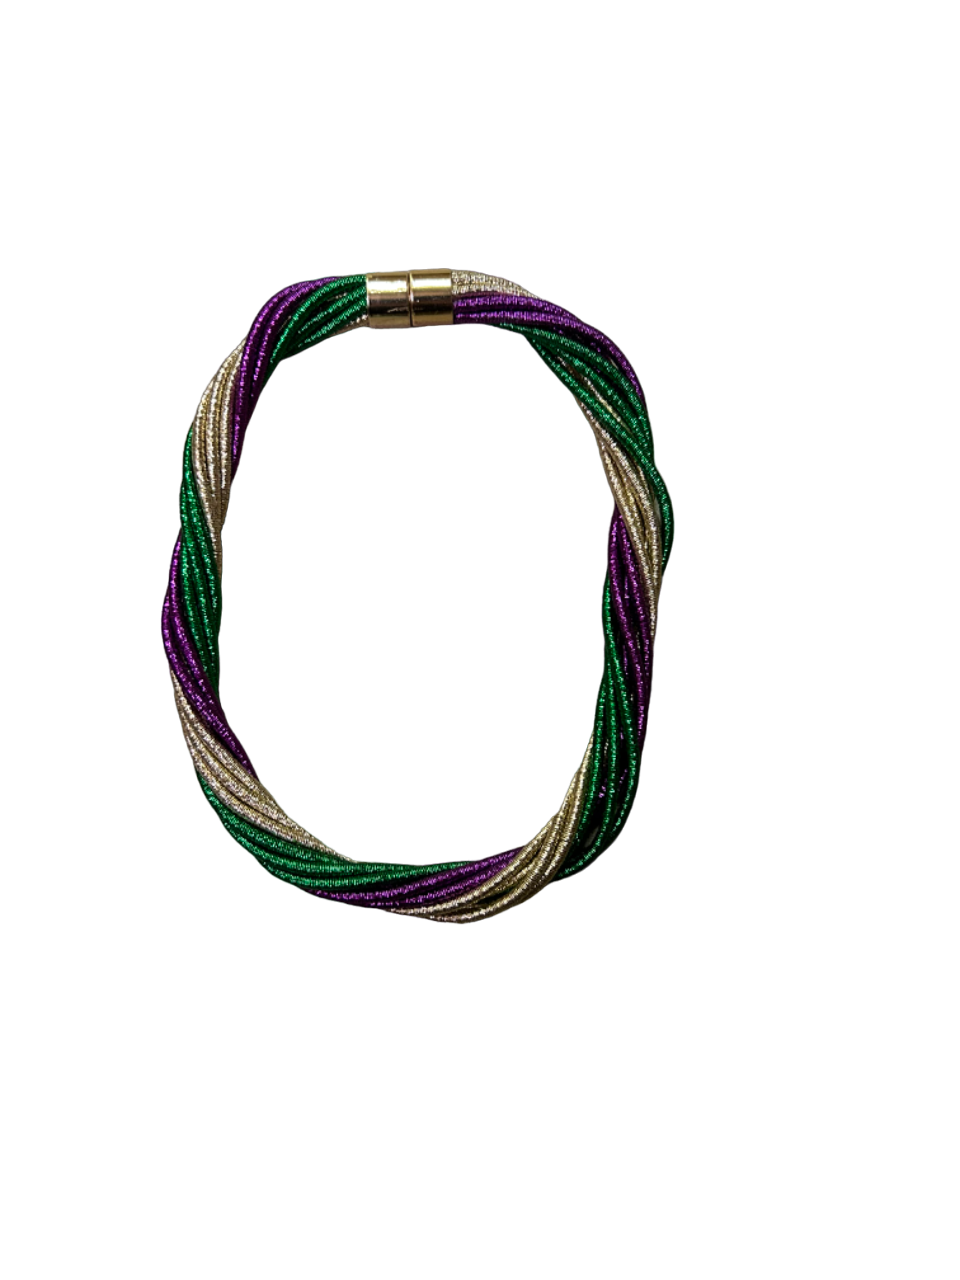 Purple Green and Gold Braid Necklace